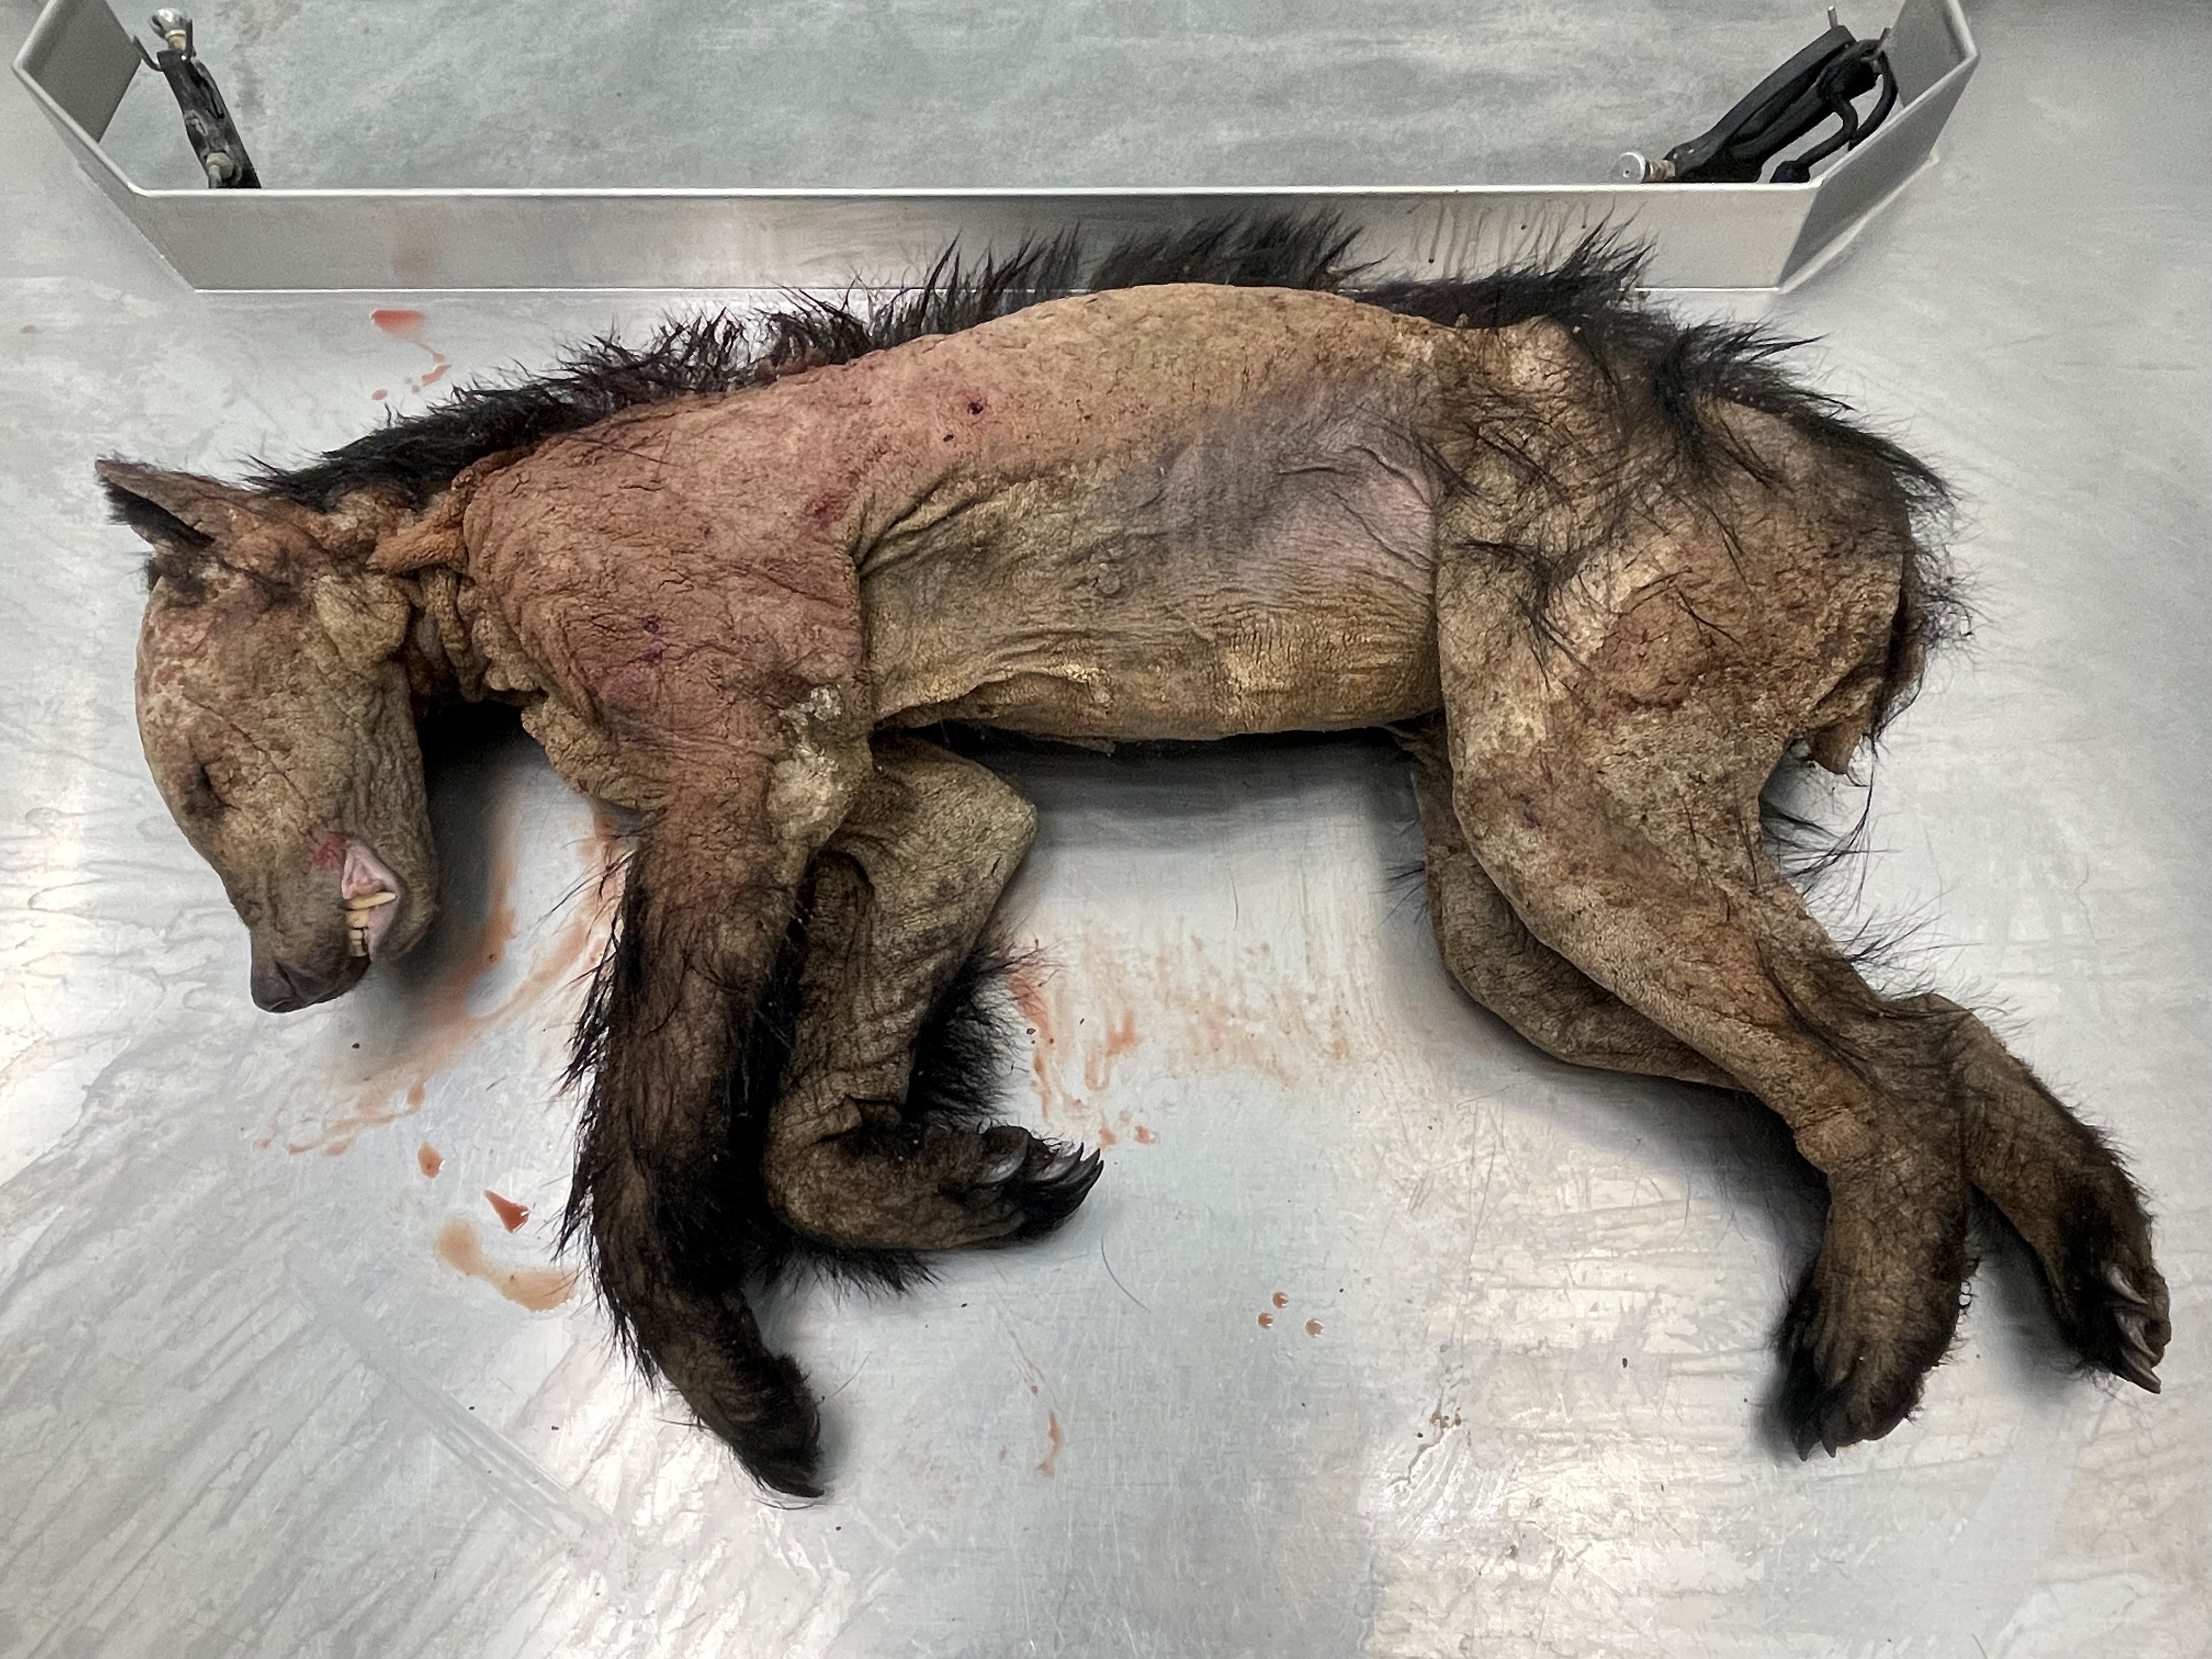 Black bear with its entire body covered in severe mange infection